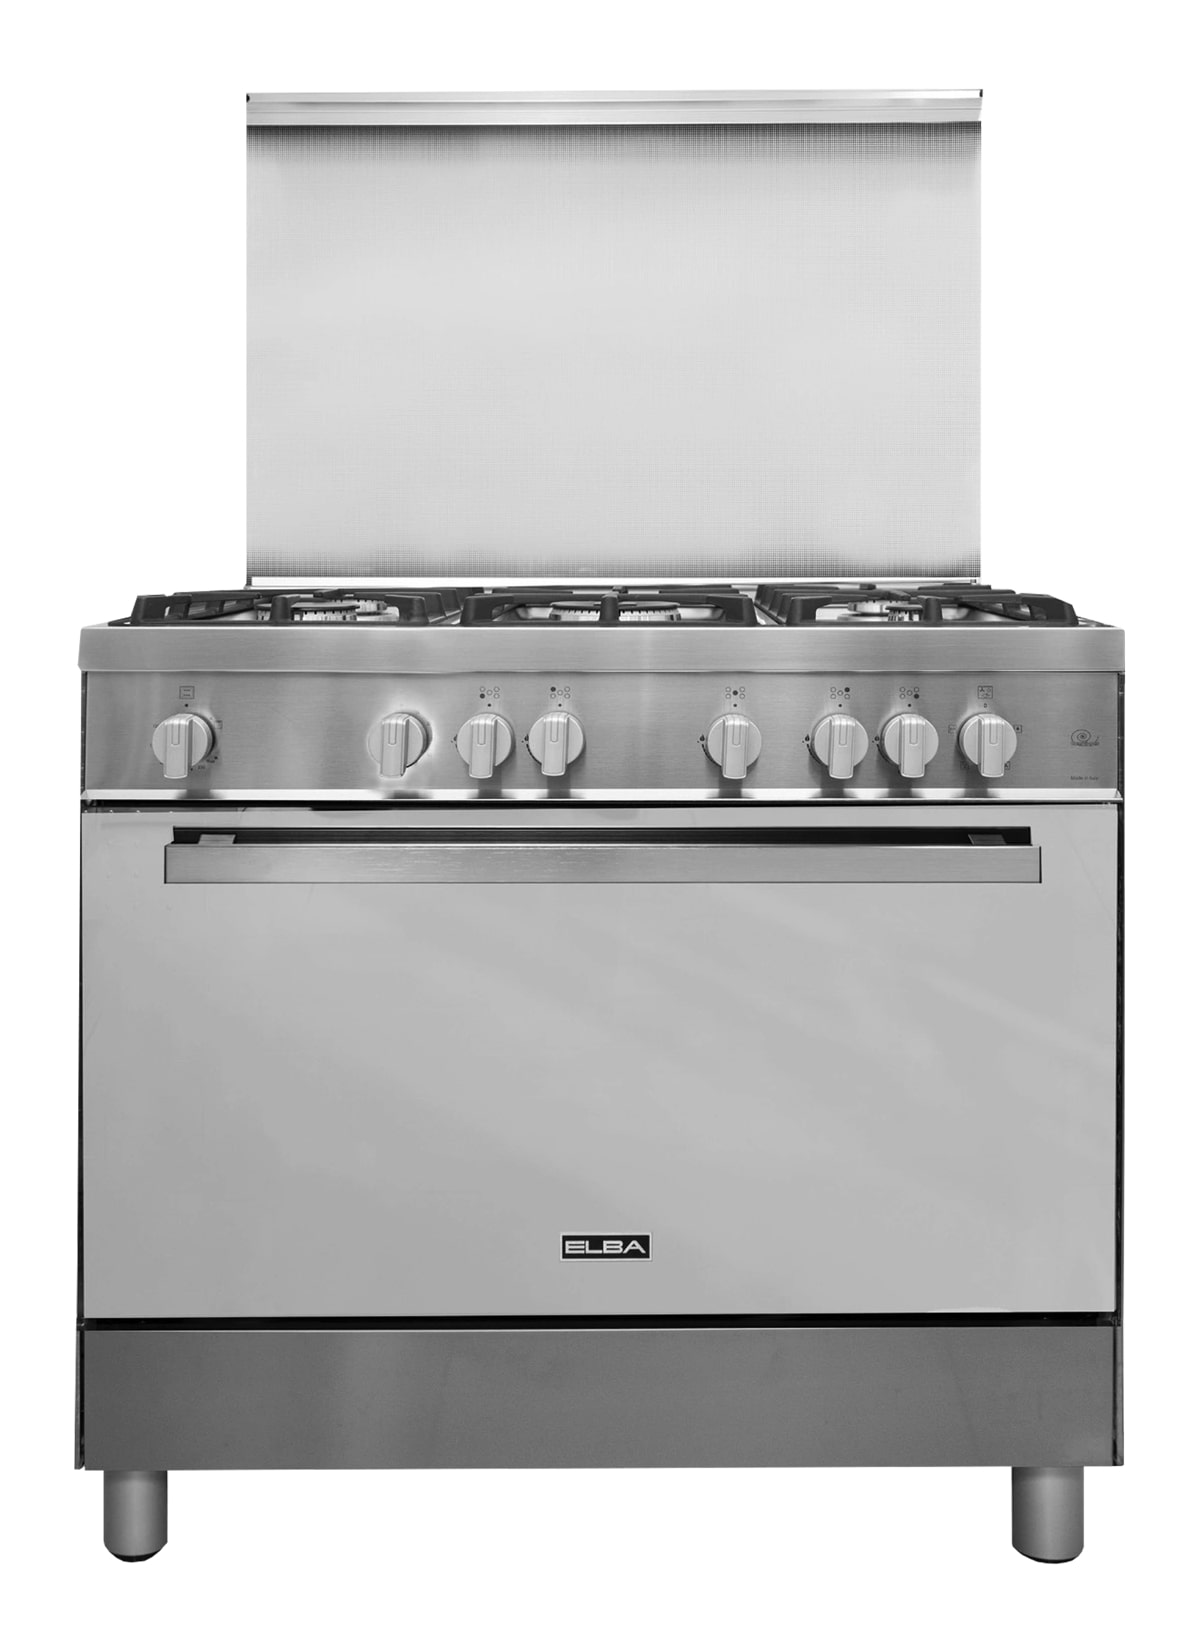 Elba Gas Cooker 90 Cm 5 Burners Steel With Wide Enameled Iron Grids